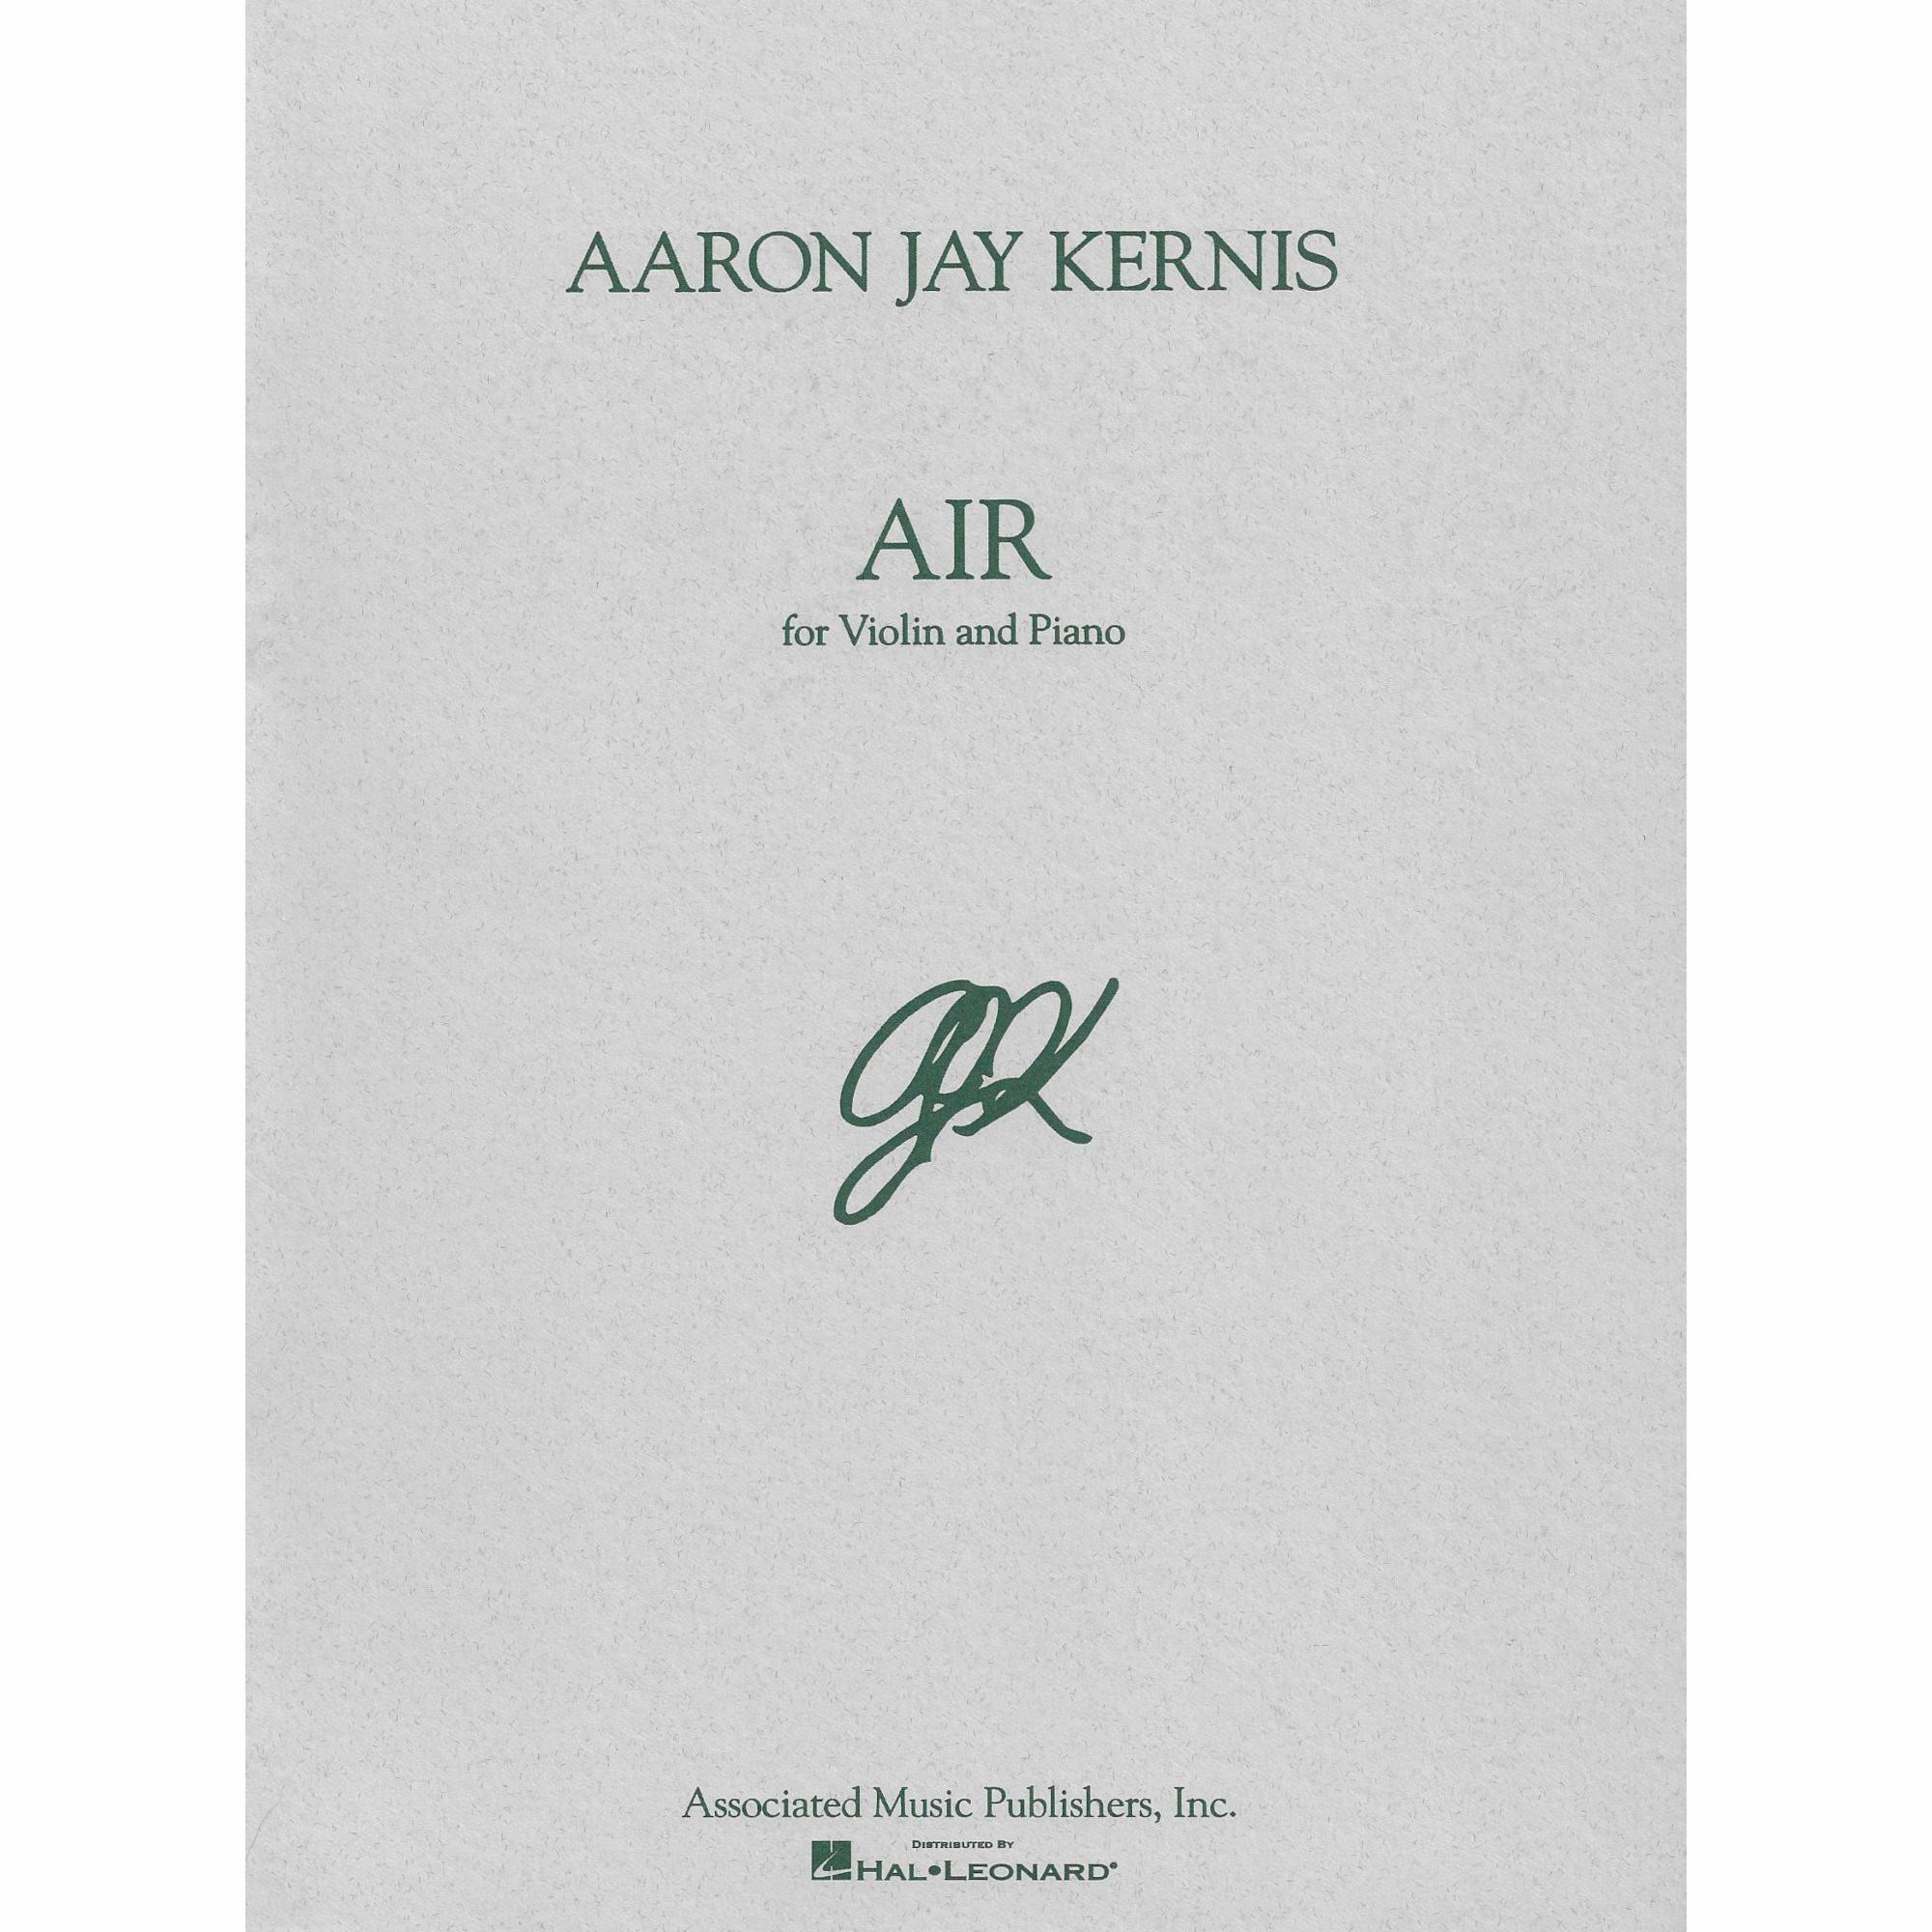 Kernis - Air for Violin and Piano